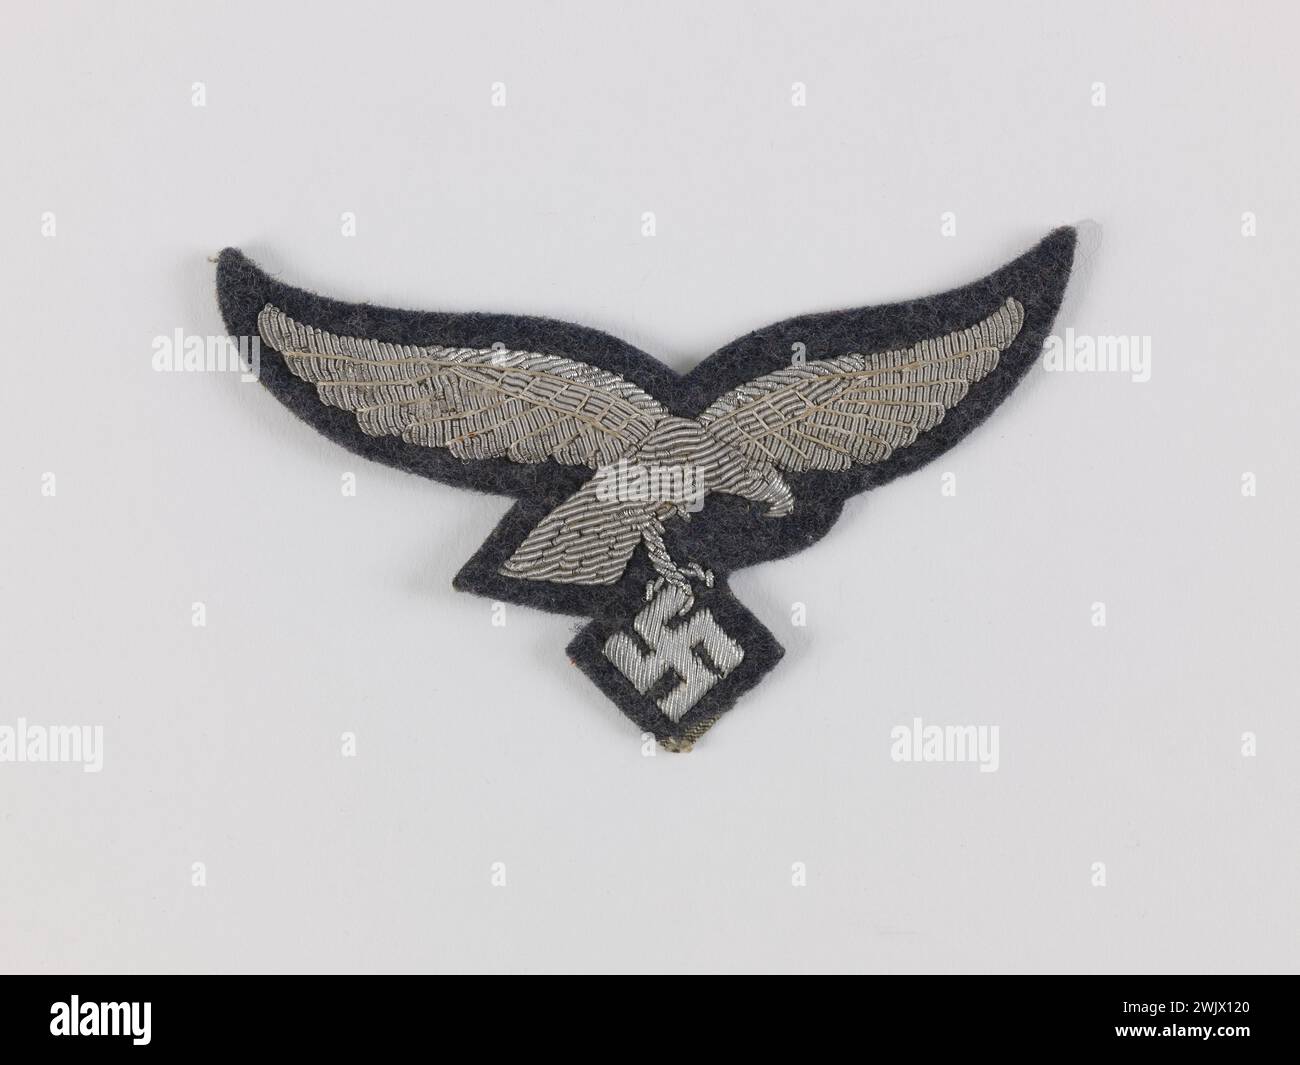 Anonymous. 'Chest eagle -' 2nd model ' - Luftwaffe officer'. Sheet. 1935-1945. General Leclerc Museum of Hauteclocque and the Liberation of Paris, Jean Moulin Museum. 158936-15 Stock Photo